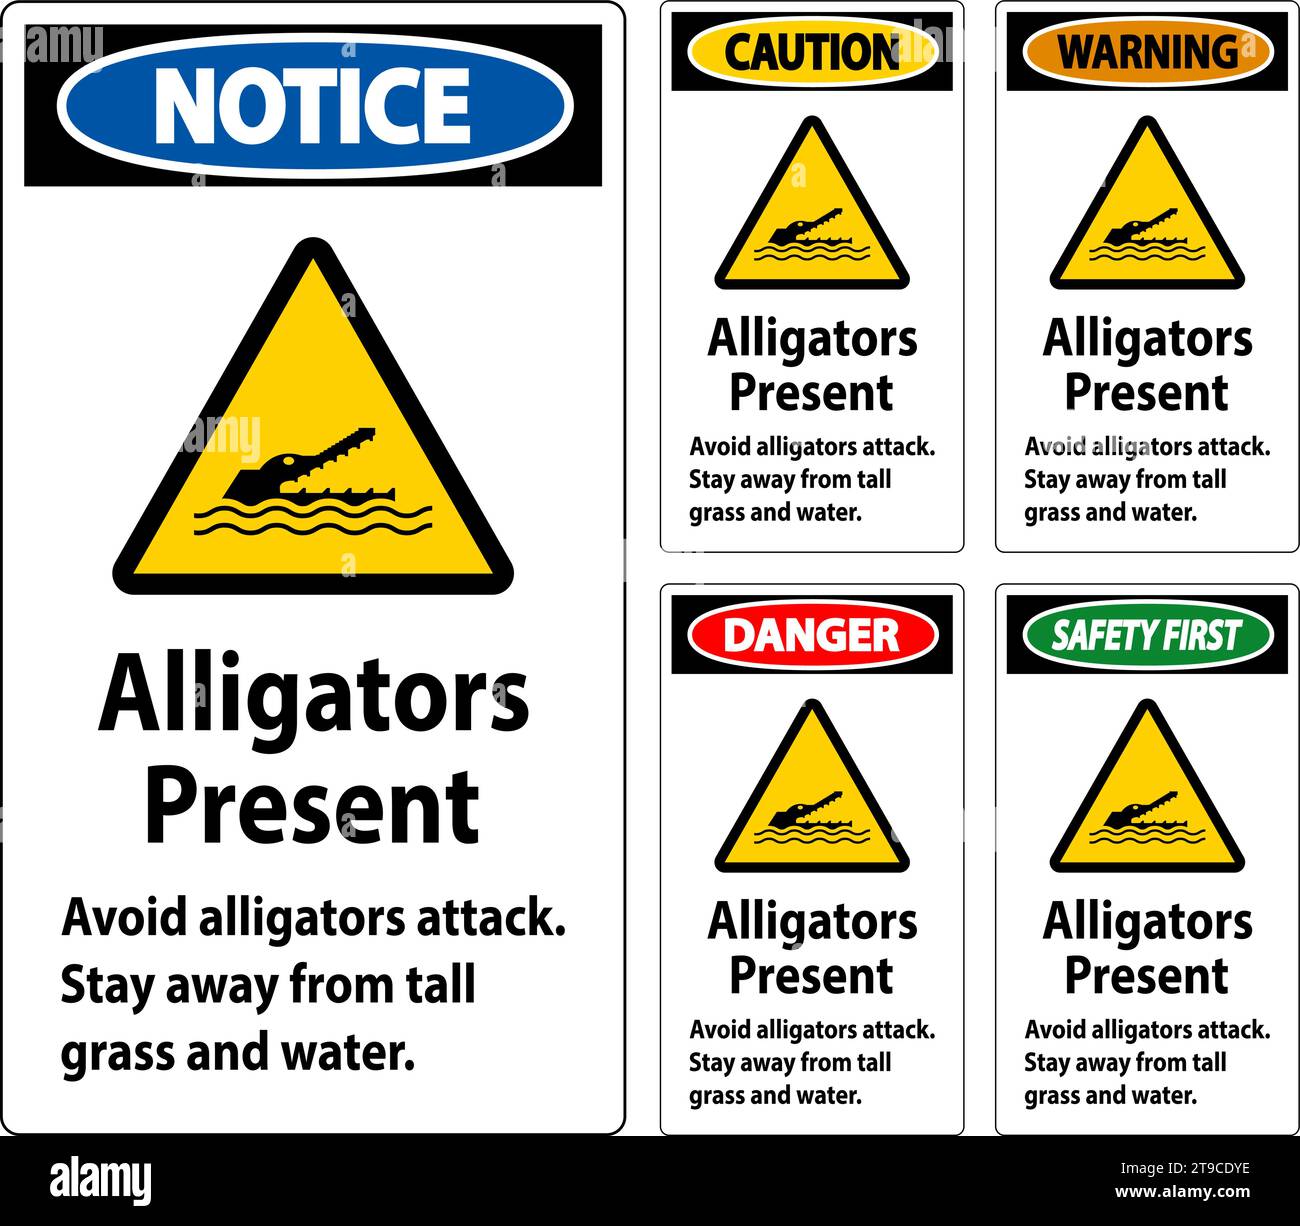 Alligator Warning Sign, Danger - Alligators Present Avoid Attack, Stay Away From Tall Grass And Water Stock Vector